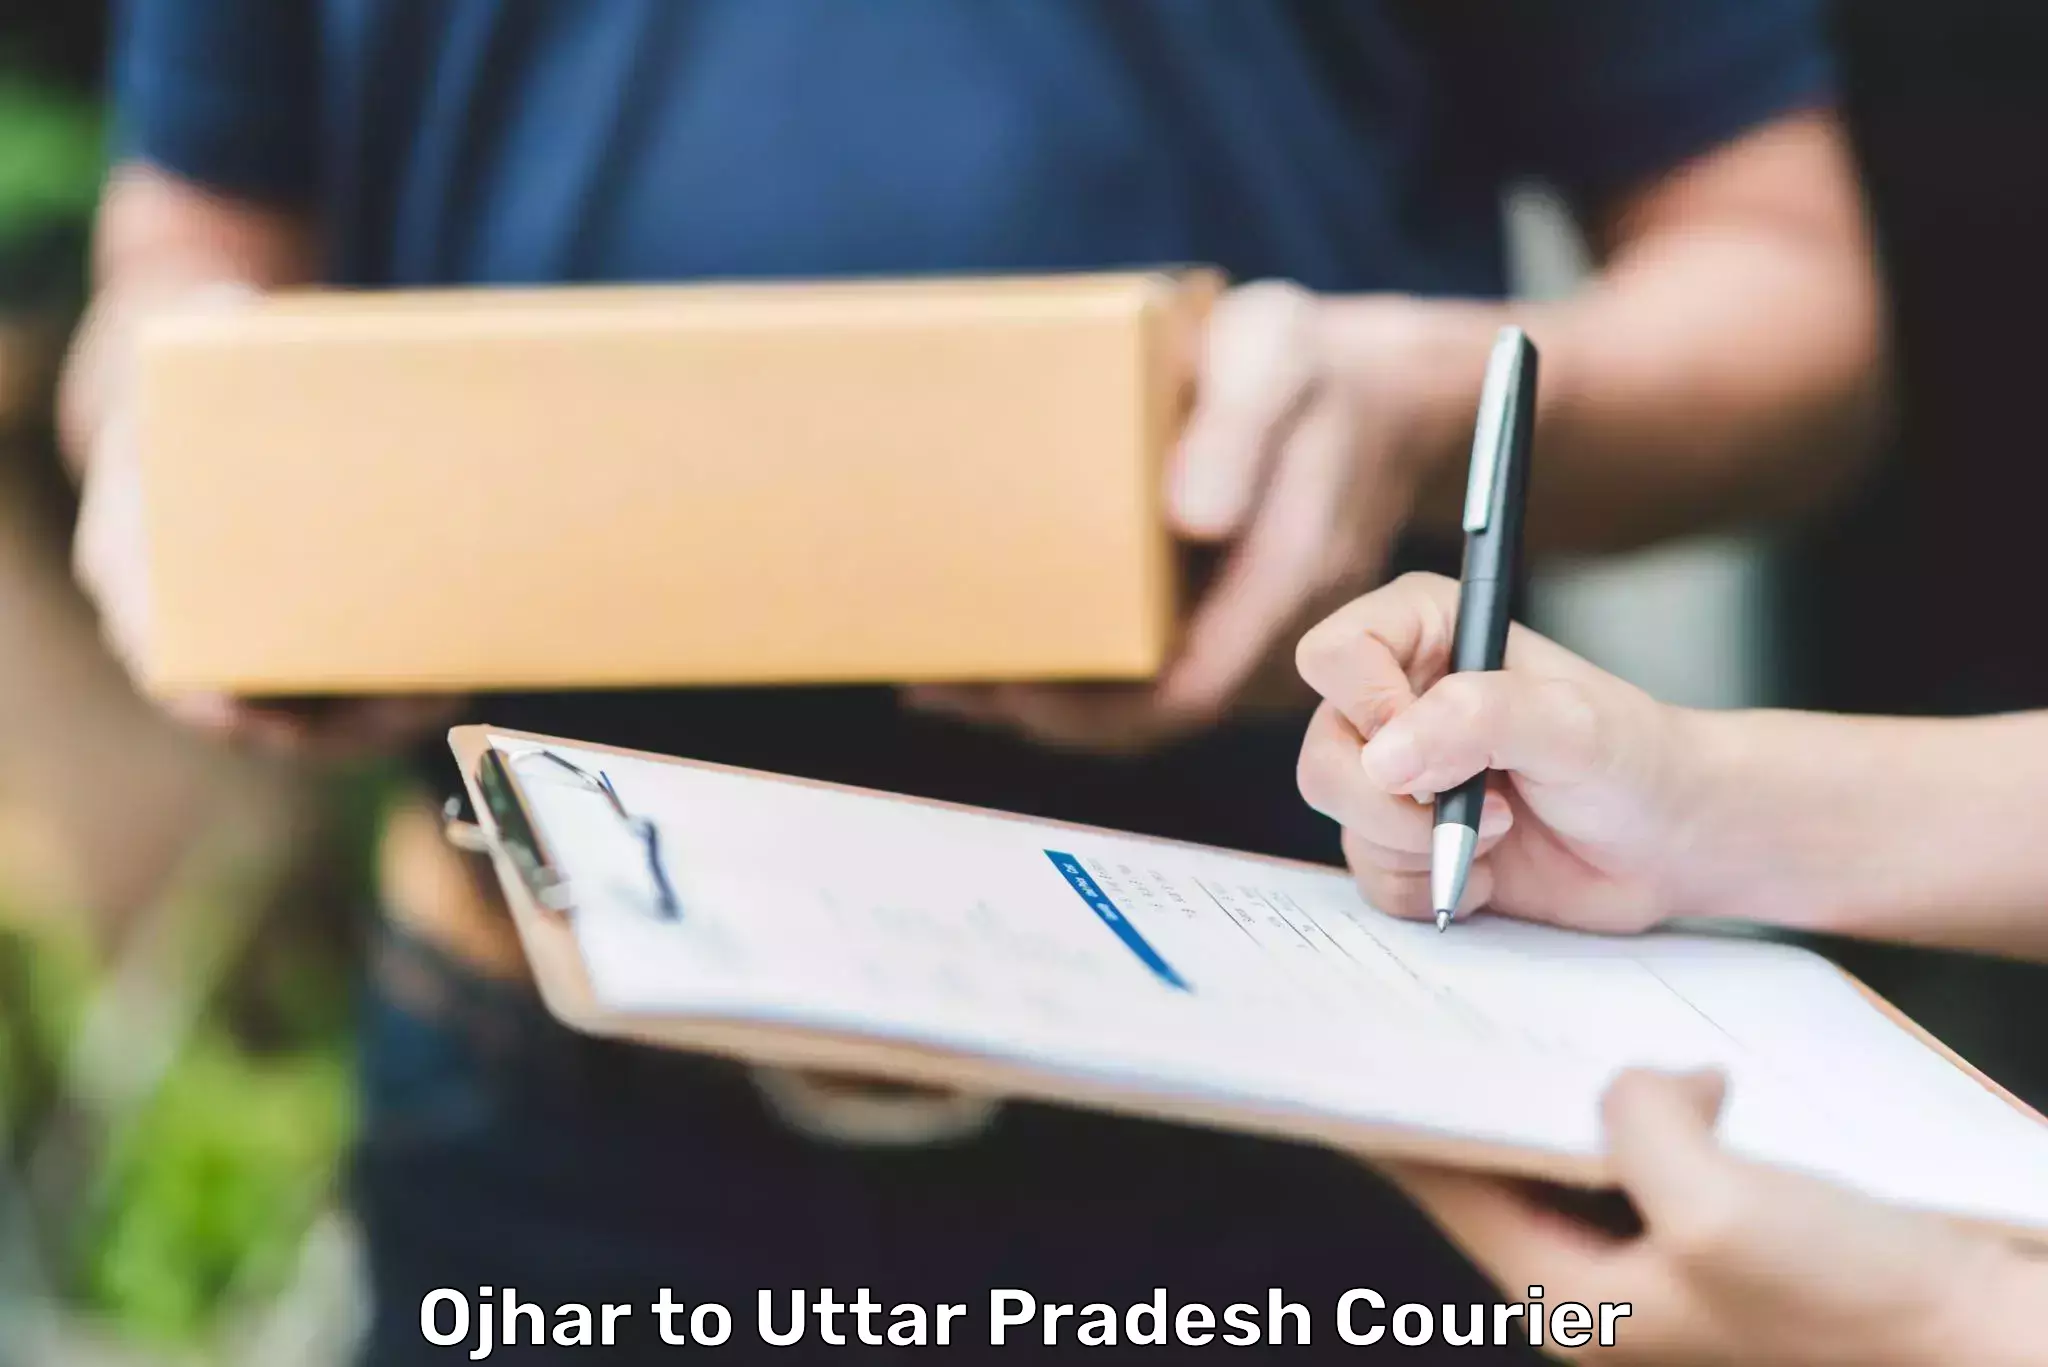 24/7 courier service Ojhar to Fatehabad Agra